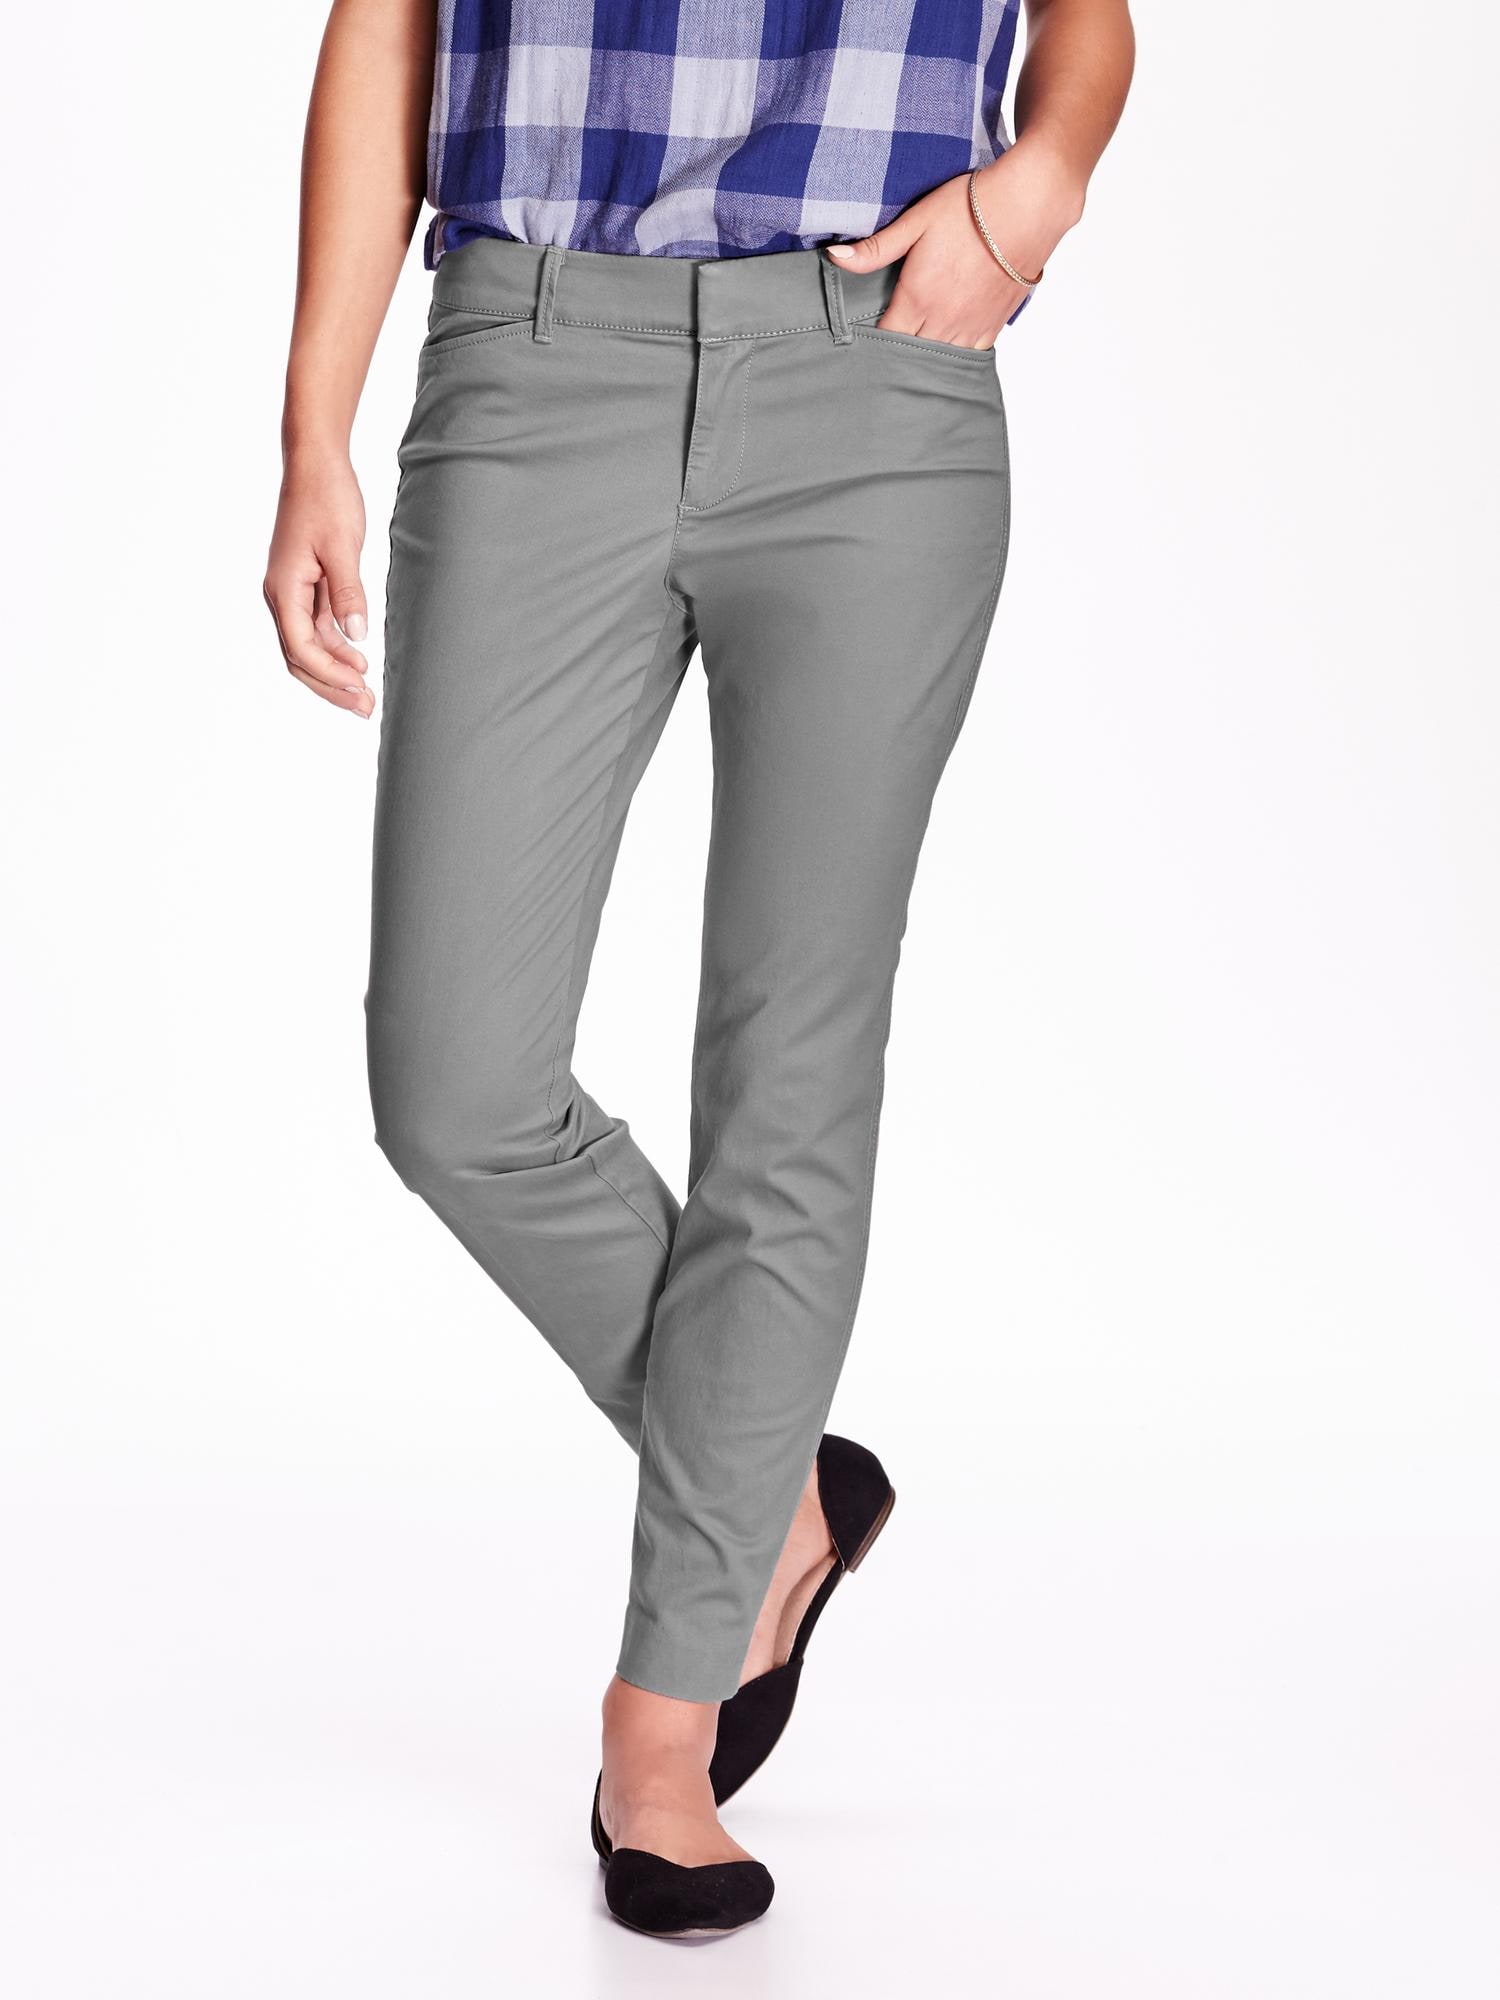 Pixie Ankle Pants for Women